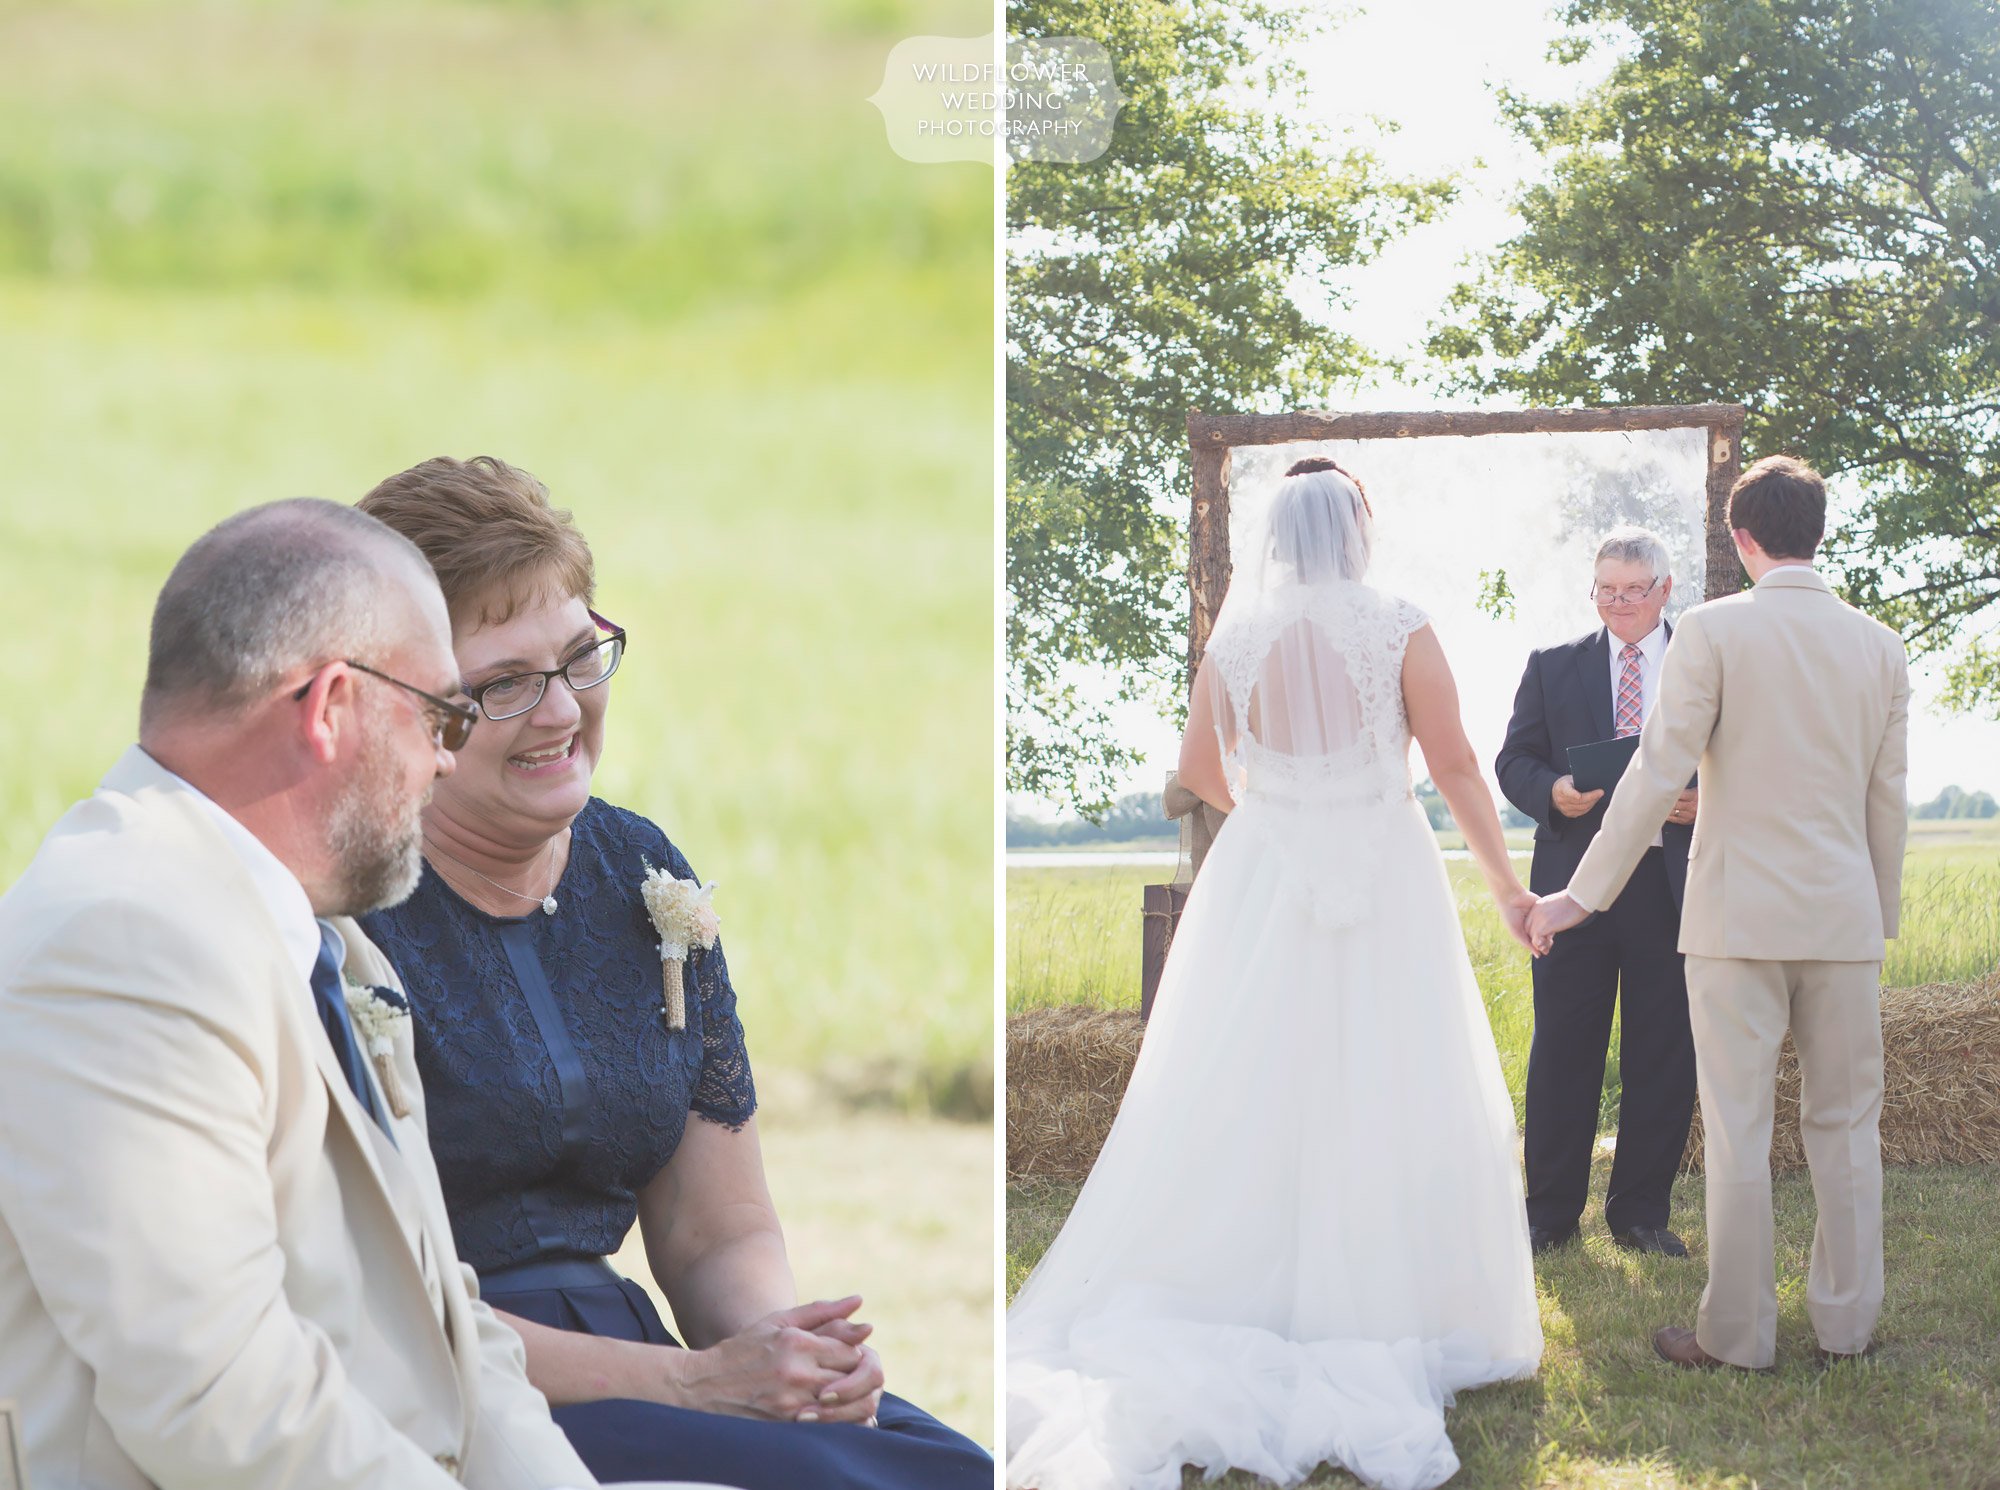 Candid photos of wedding guests watching the ceremony in the country at Bradford Farm.